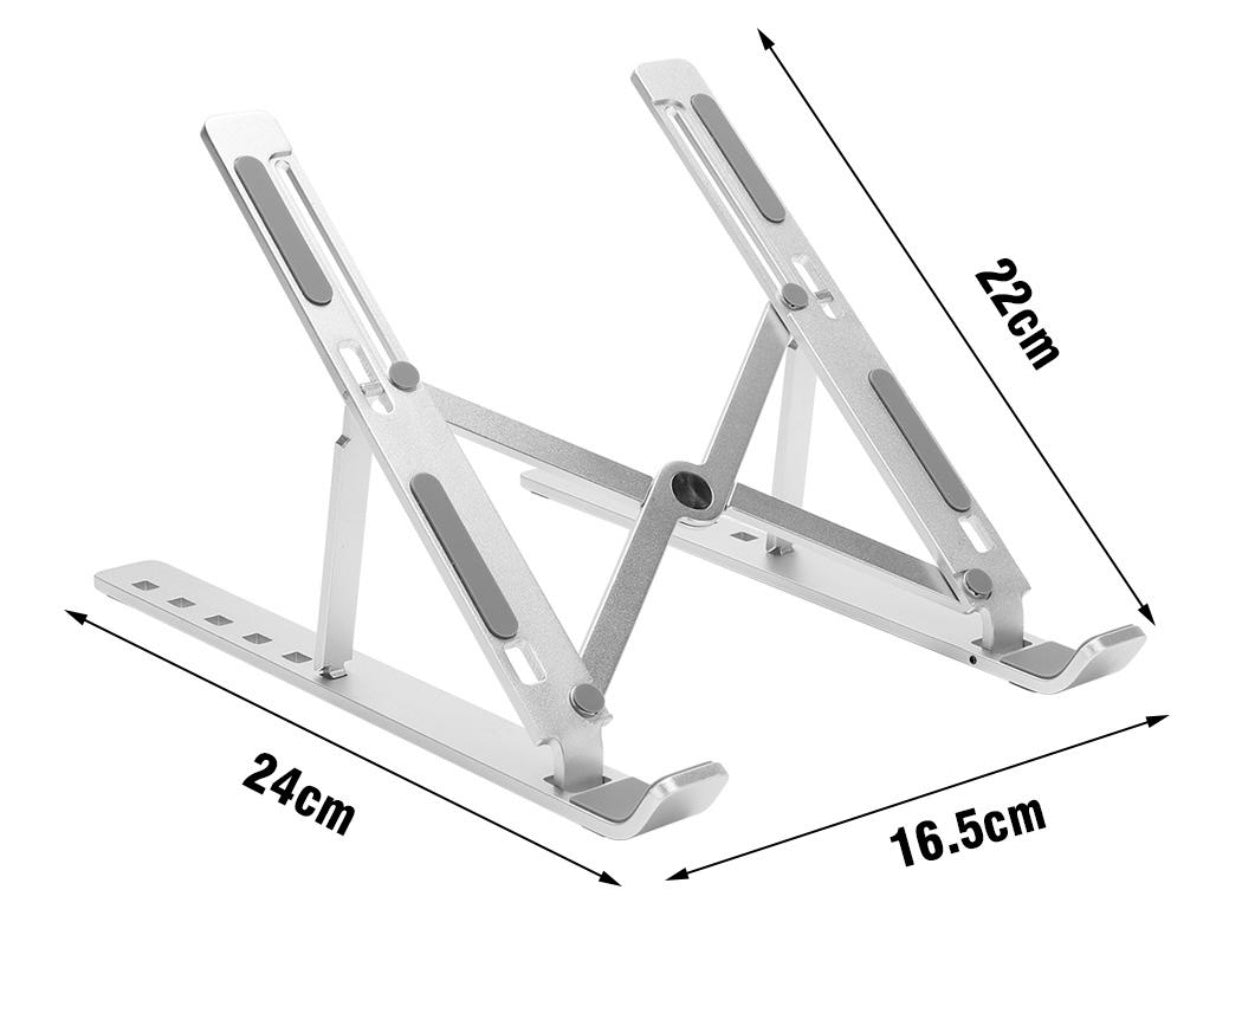 Aluminum Laptop Stand, Foldable, Ergonomic and Portable - Supports Up to 17 inch Screen, Six Level Adjustment. Note the Height and width of this device.